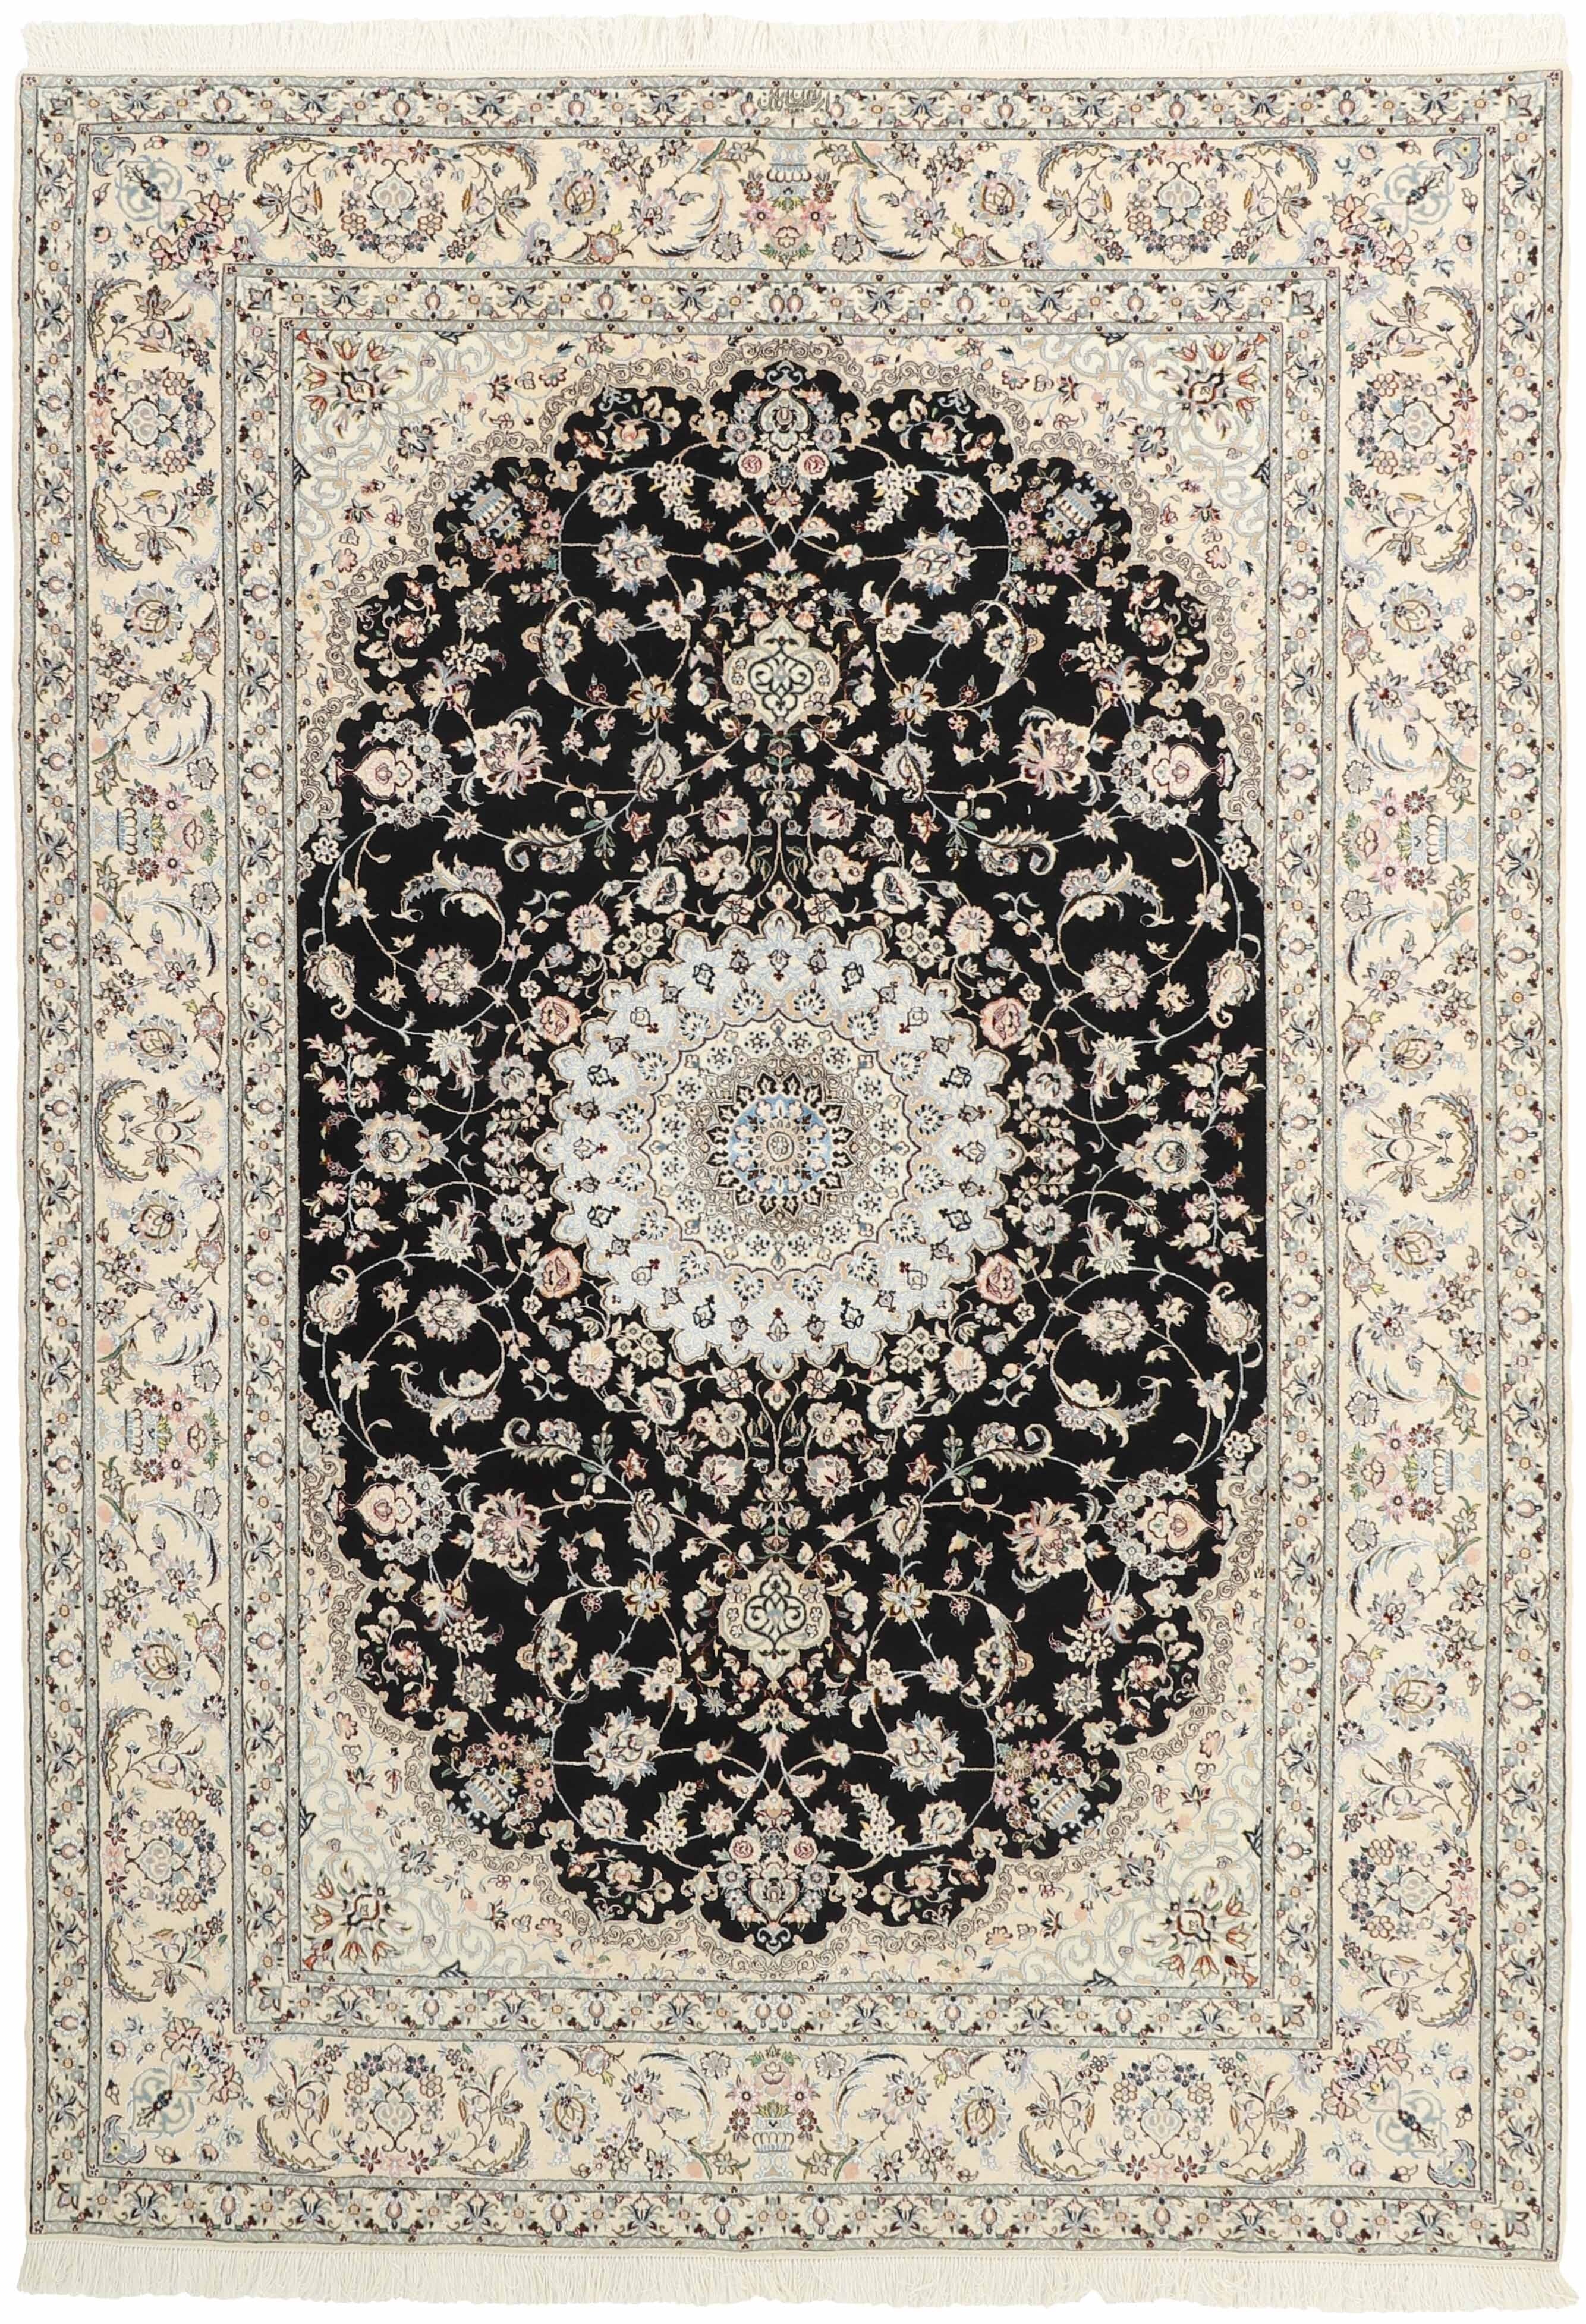 Authentic oriental rug with traditional floral design in cream, navy,  blue and pink